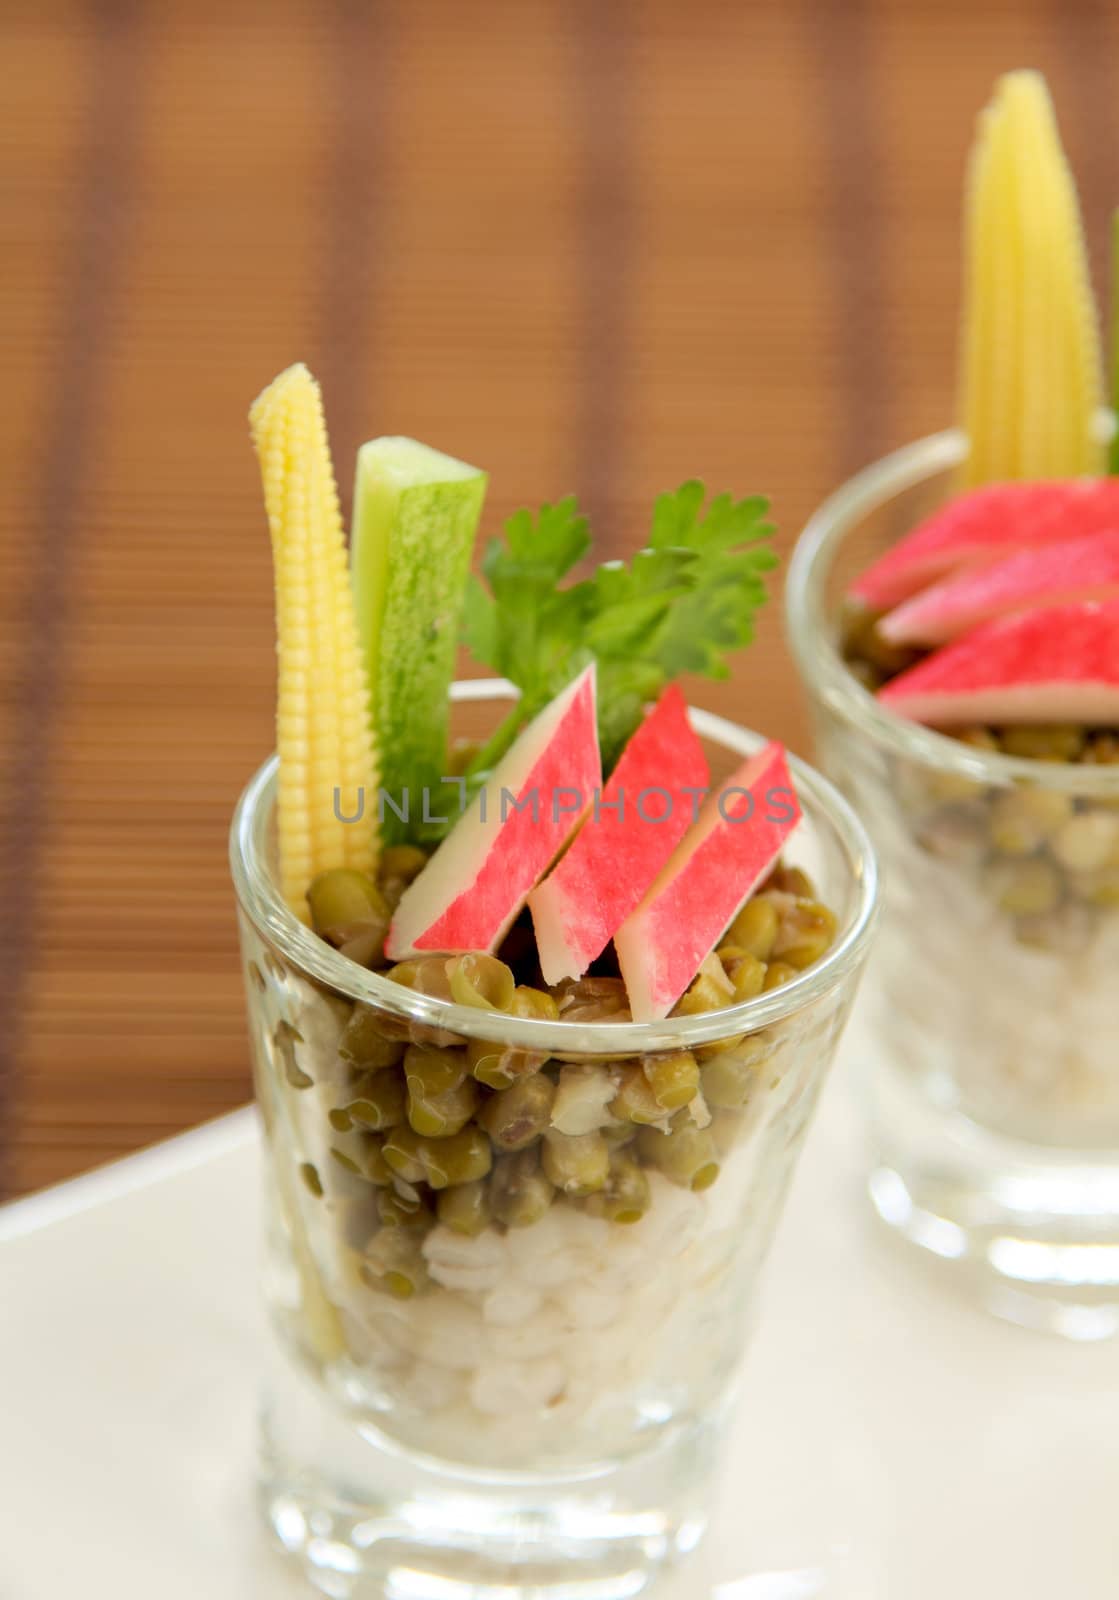 Crab stick with Mung beans and Job's tears salad